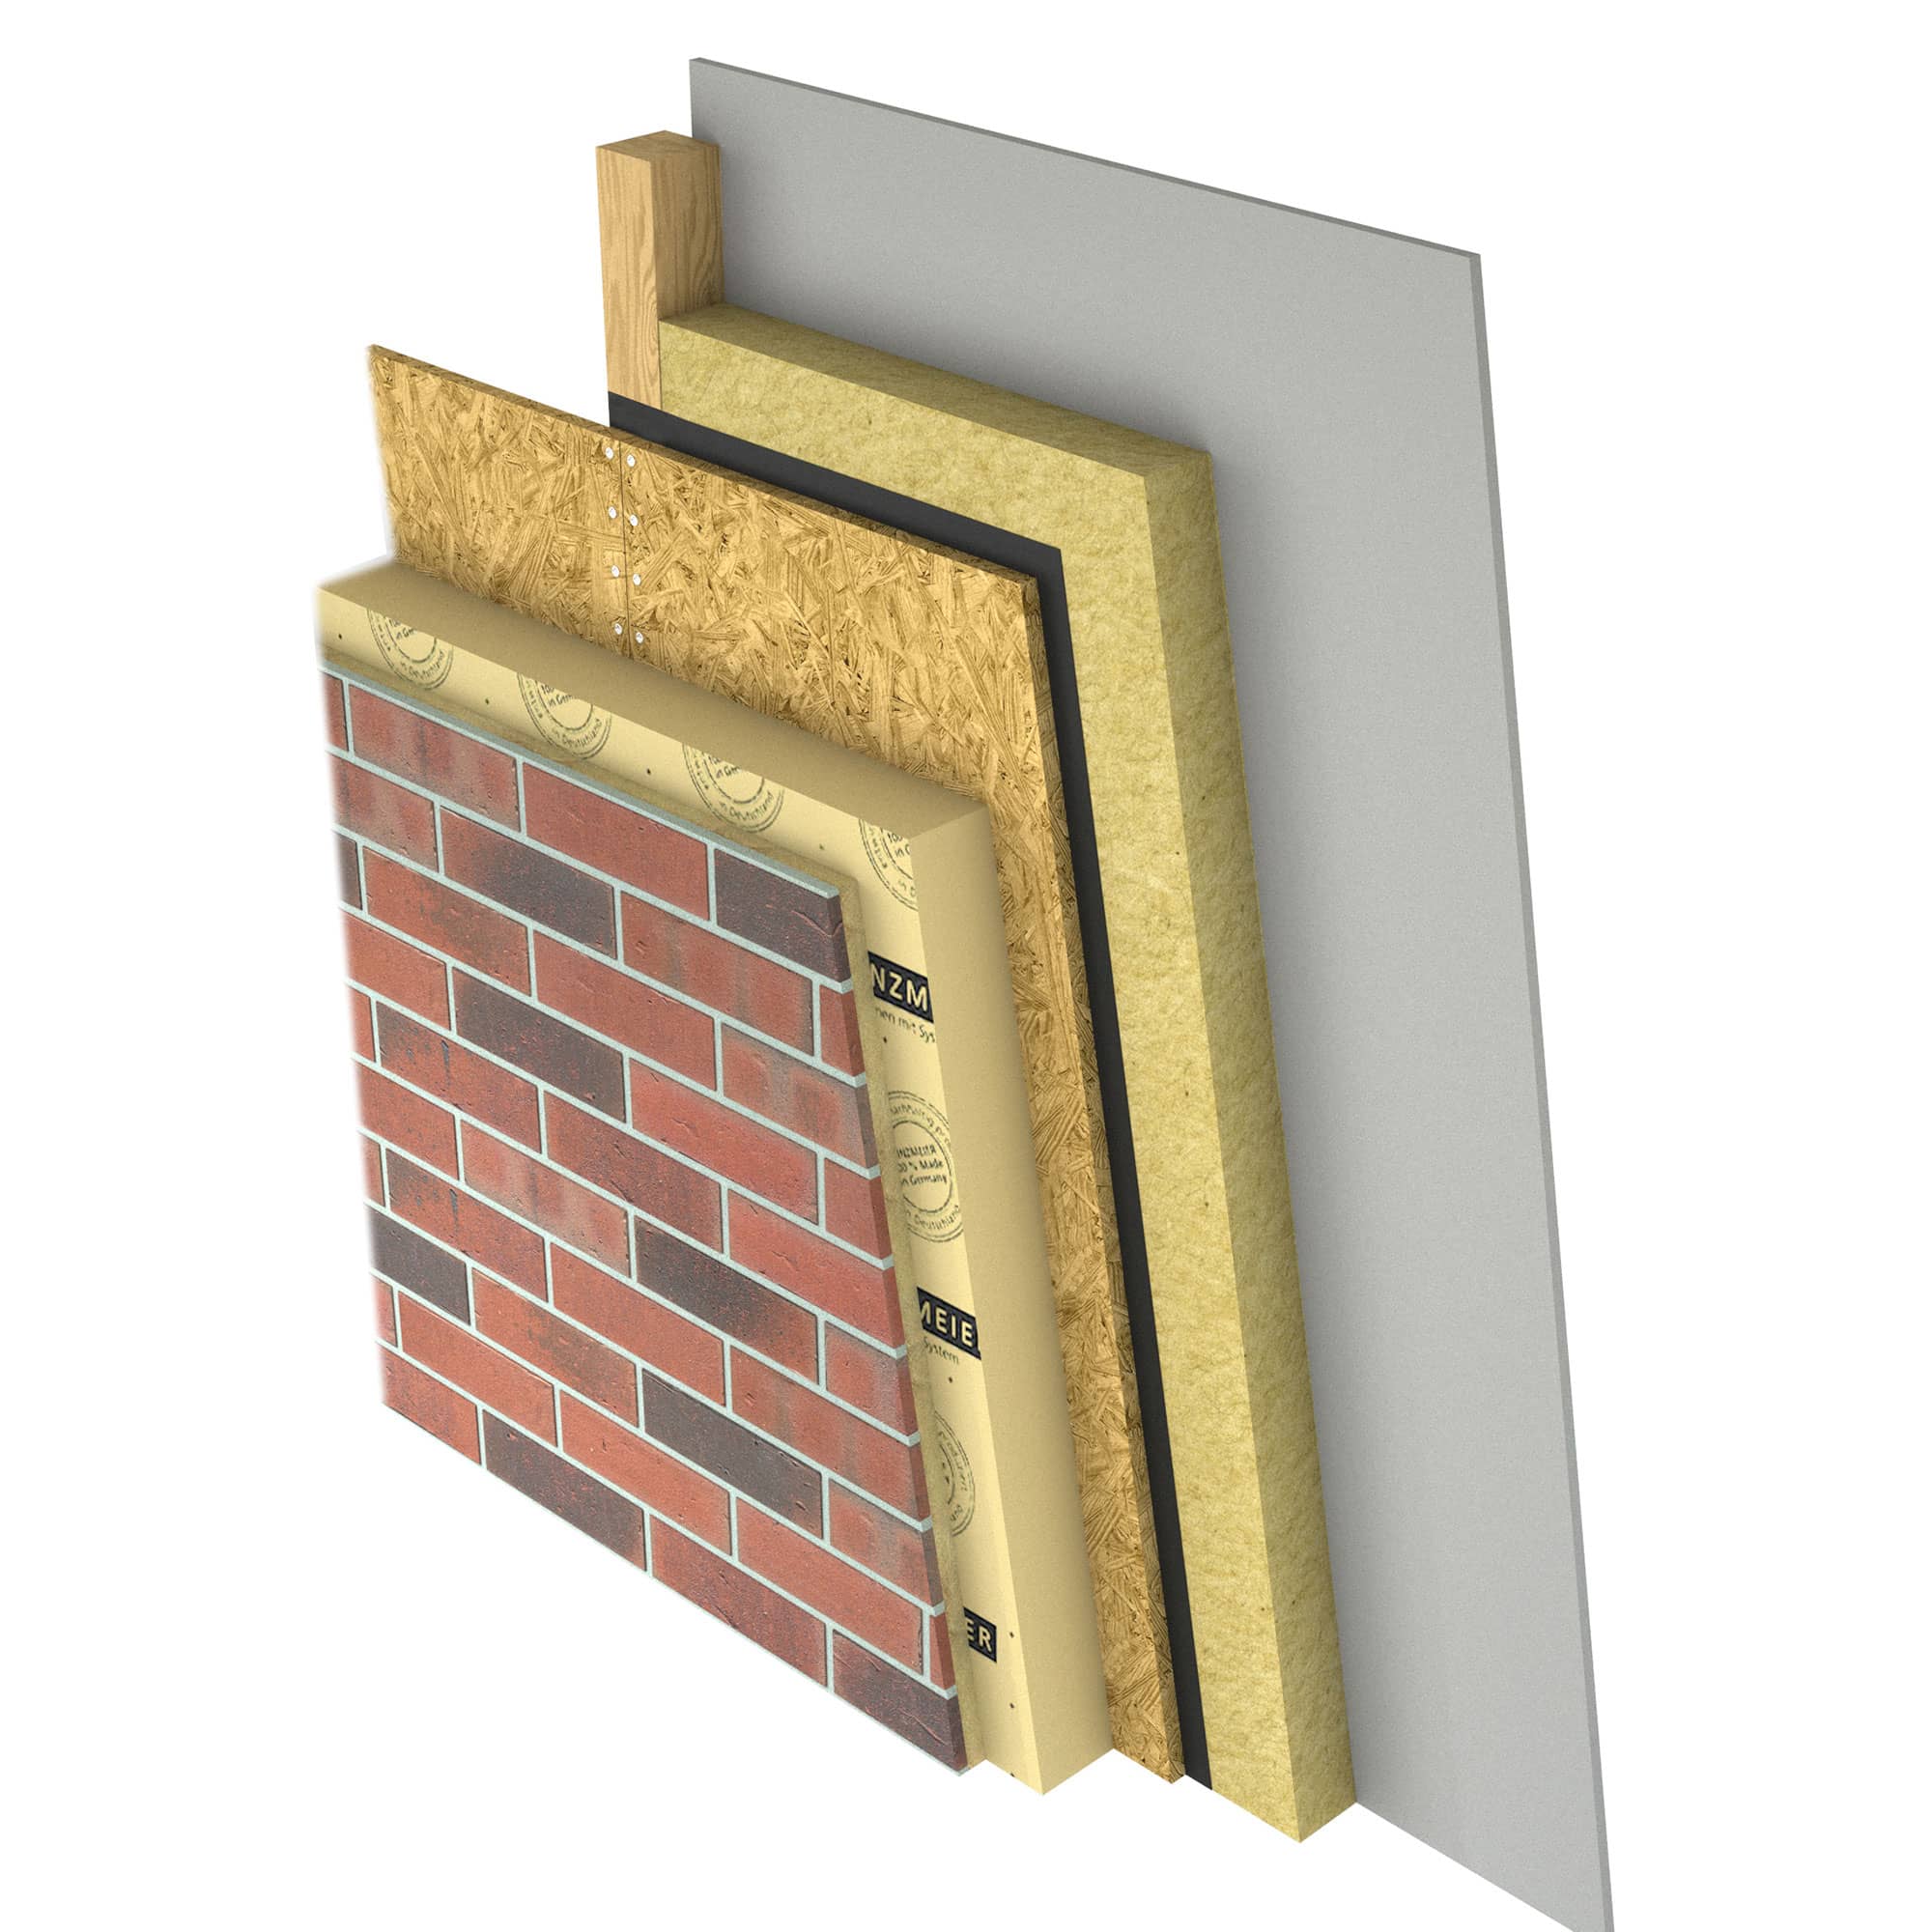 Timber frame construction with PUR insulation with the kess system